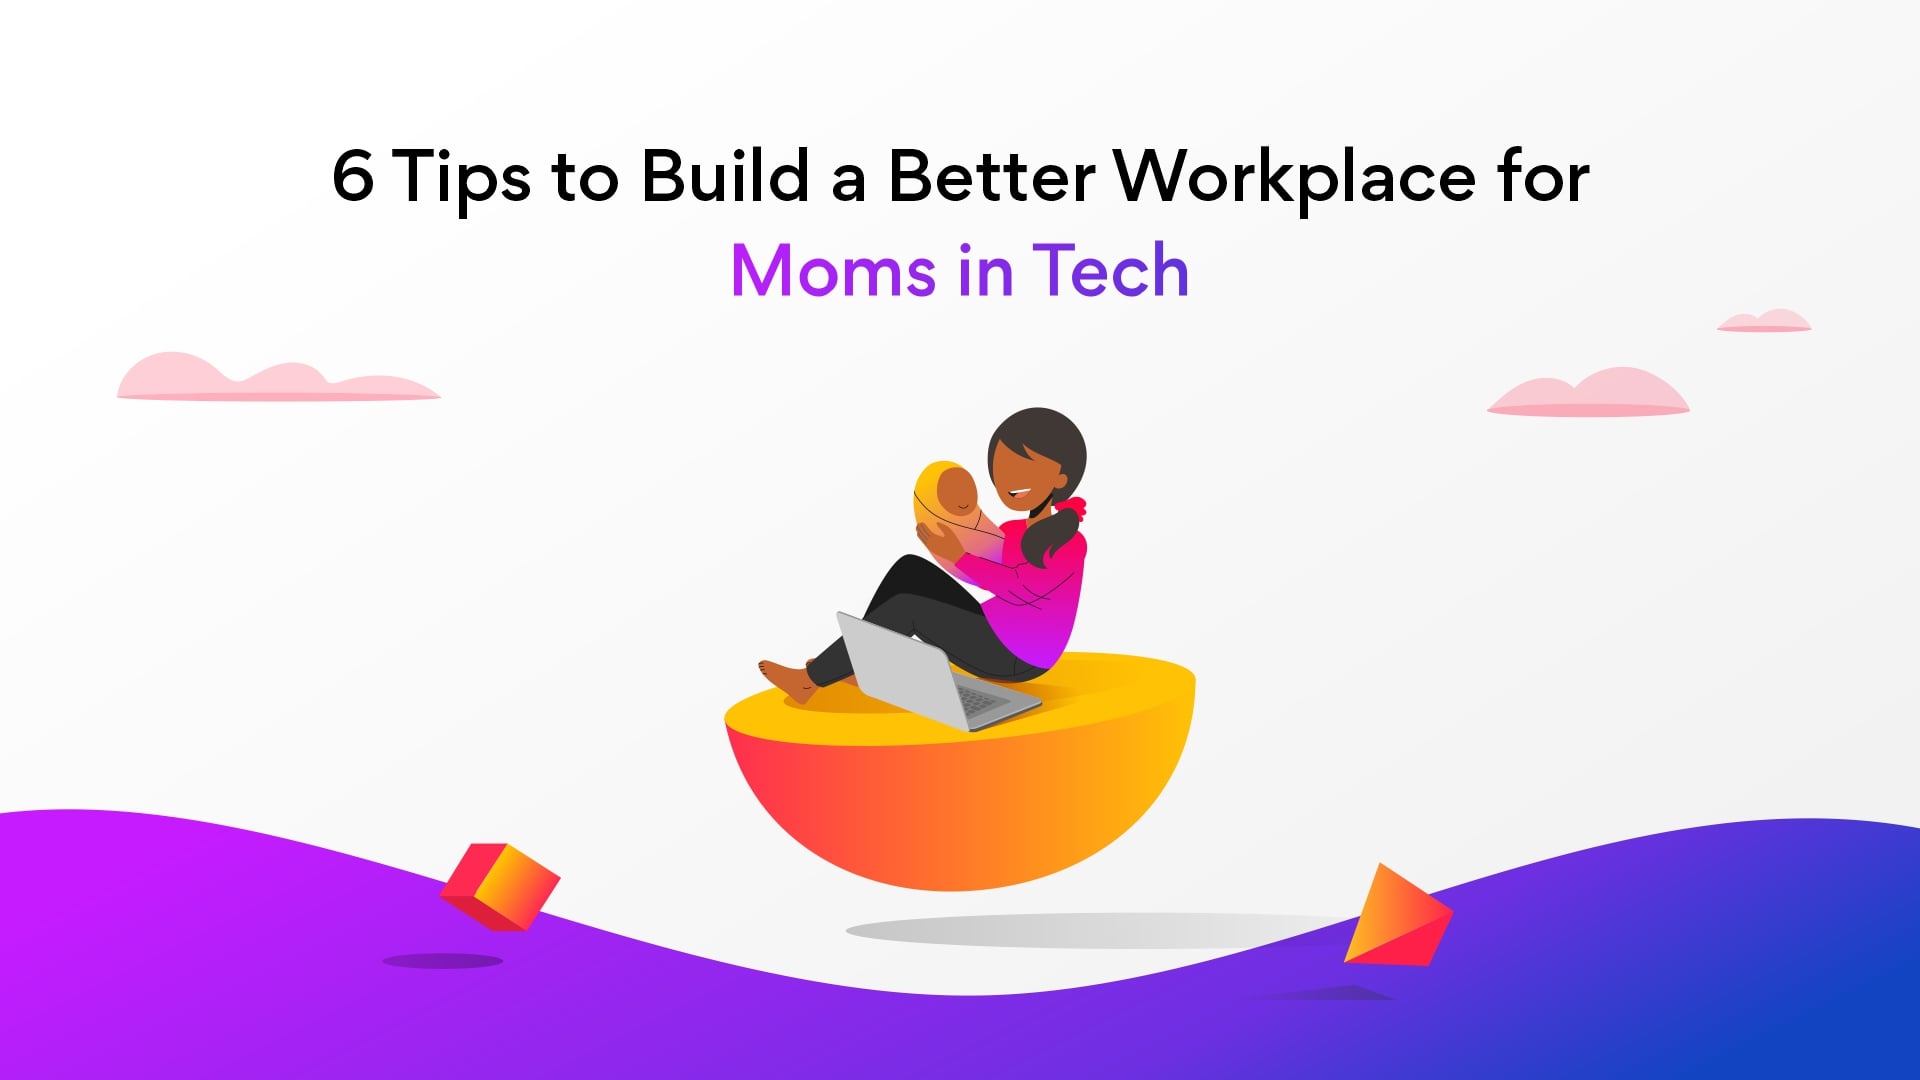 6 Tips to Empower Moms in Tech